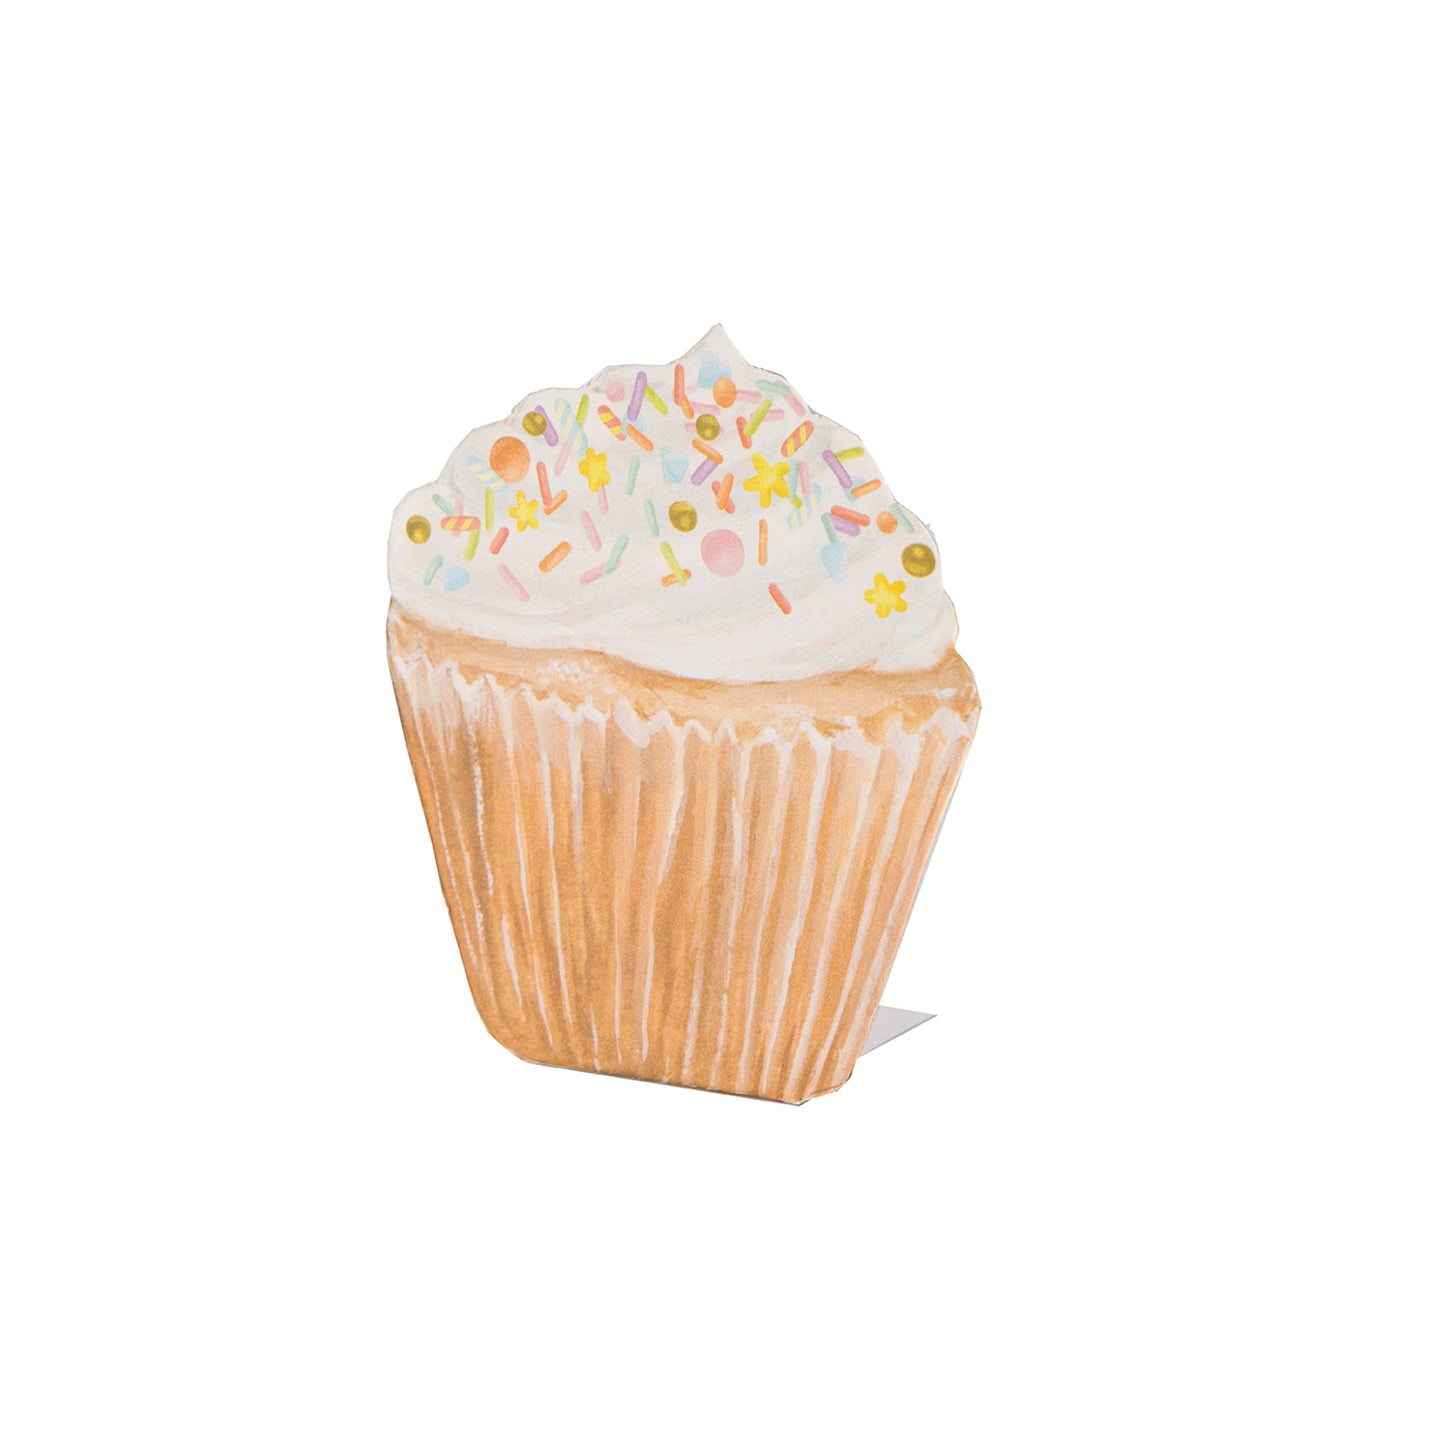 life-sized Cupcake Place Card, but you can use it as the perfect party place setting accessory. 